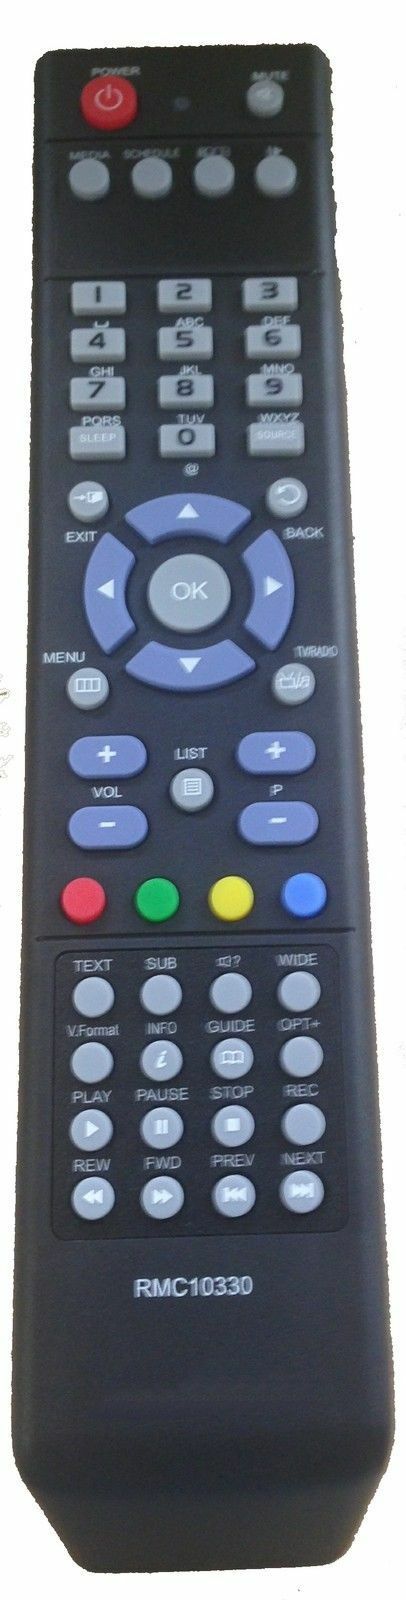 Replacement Remote Control for Skytec KLEIO